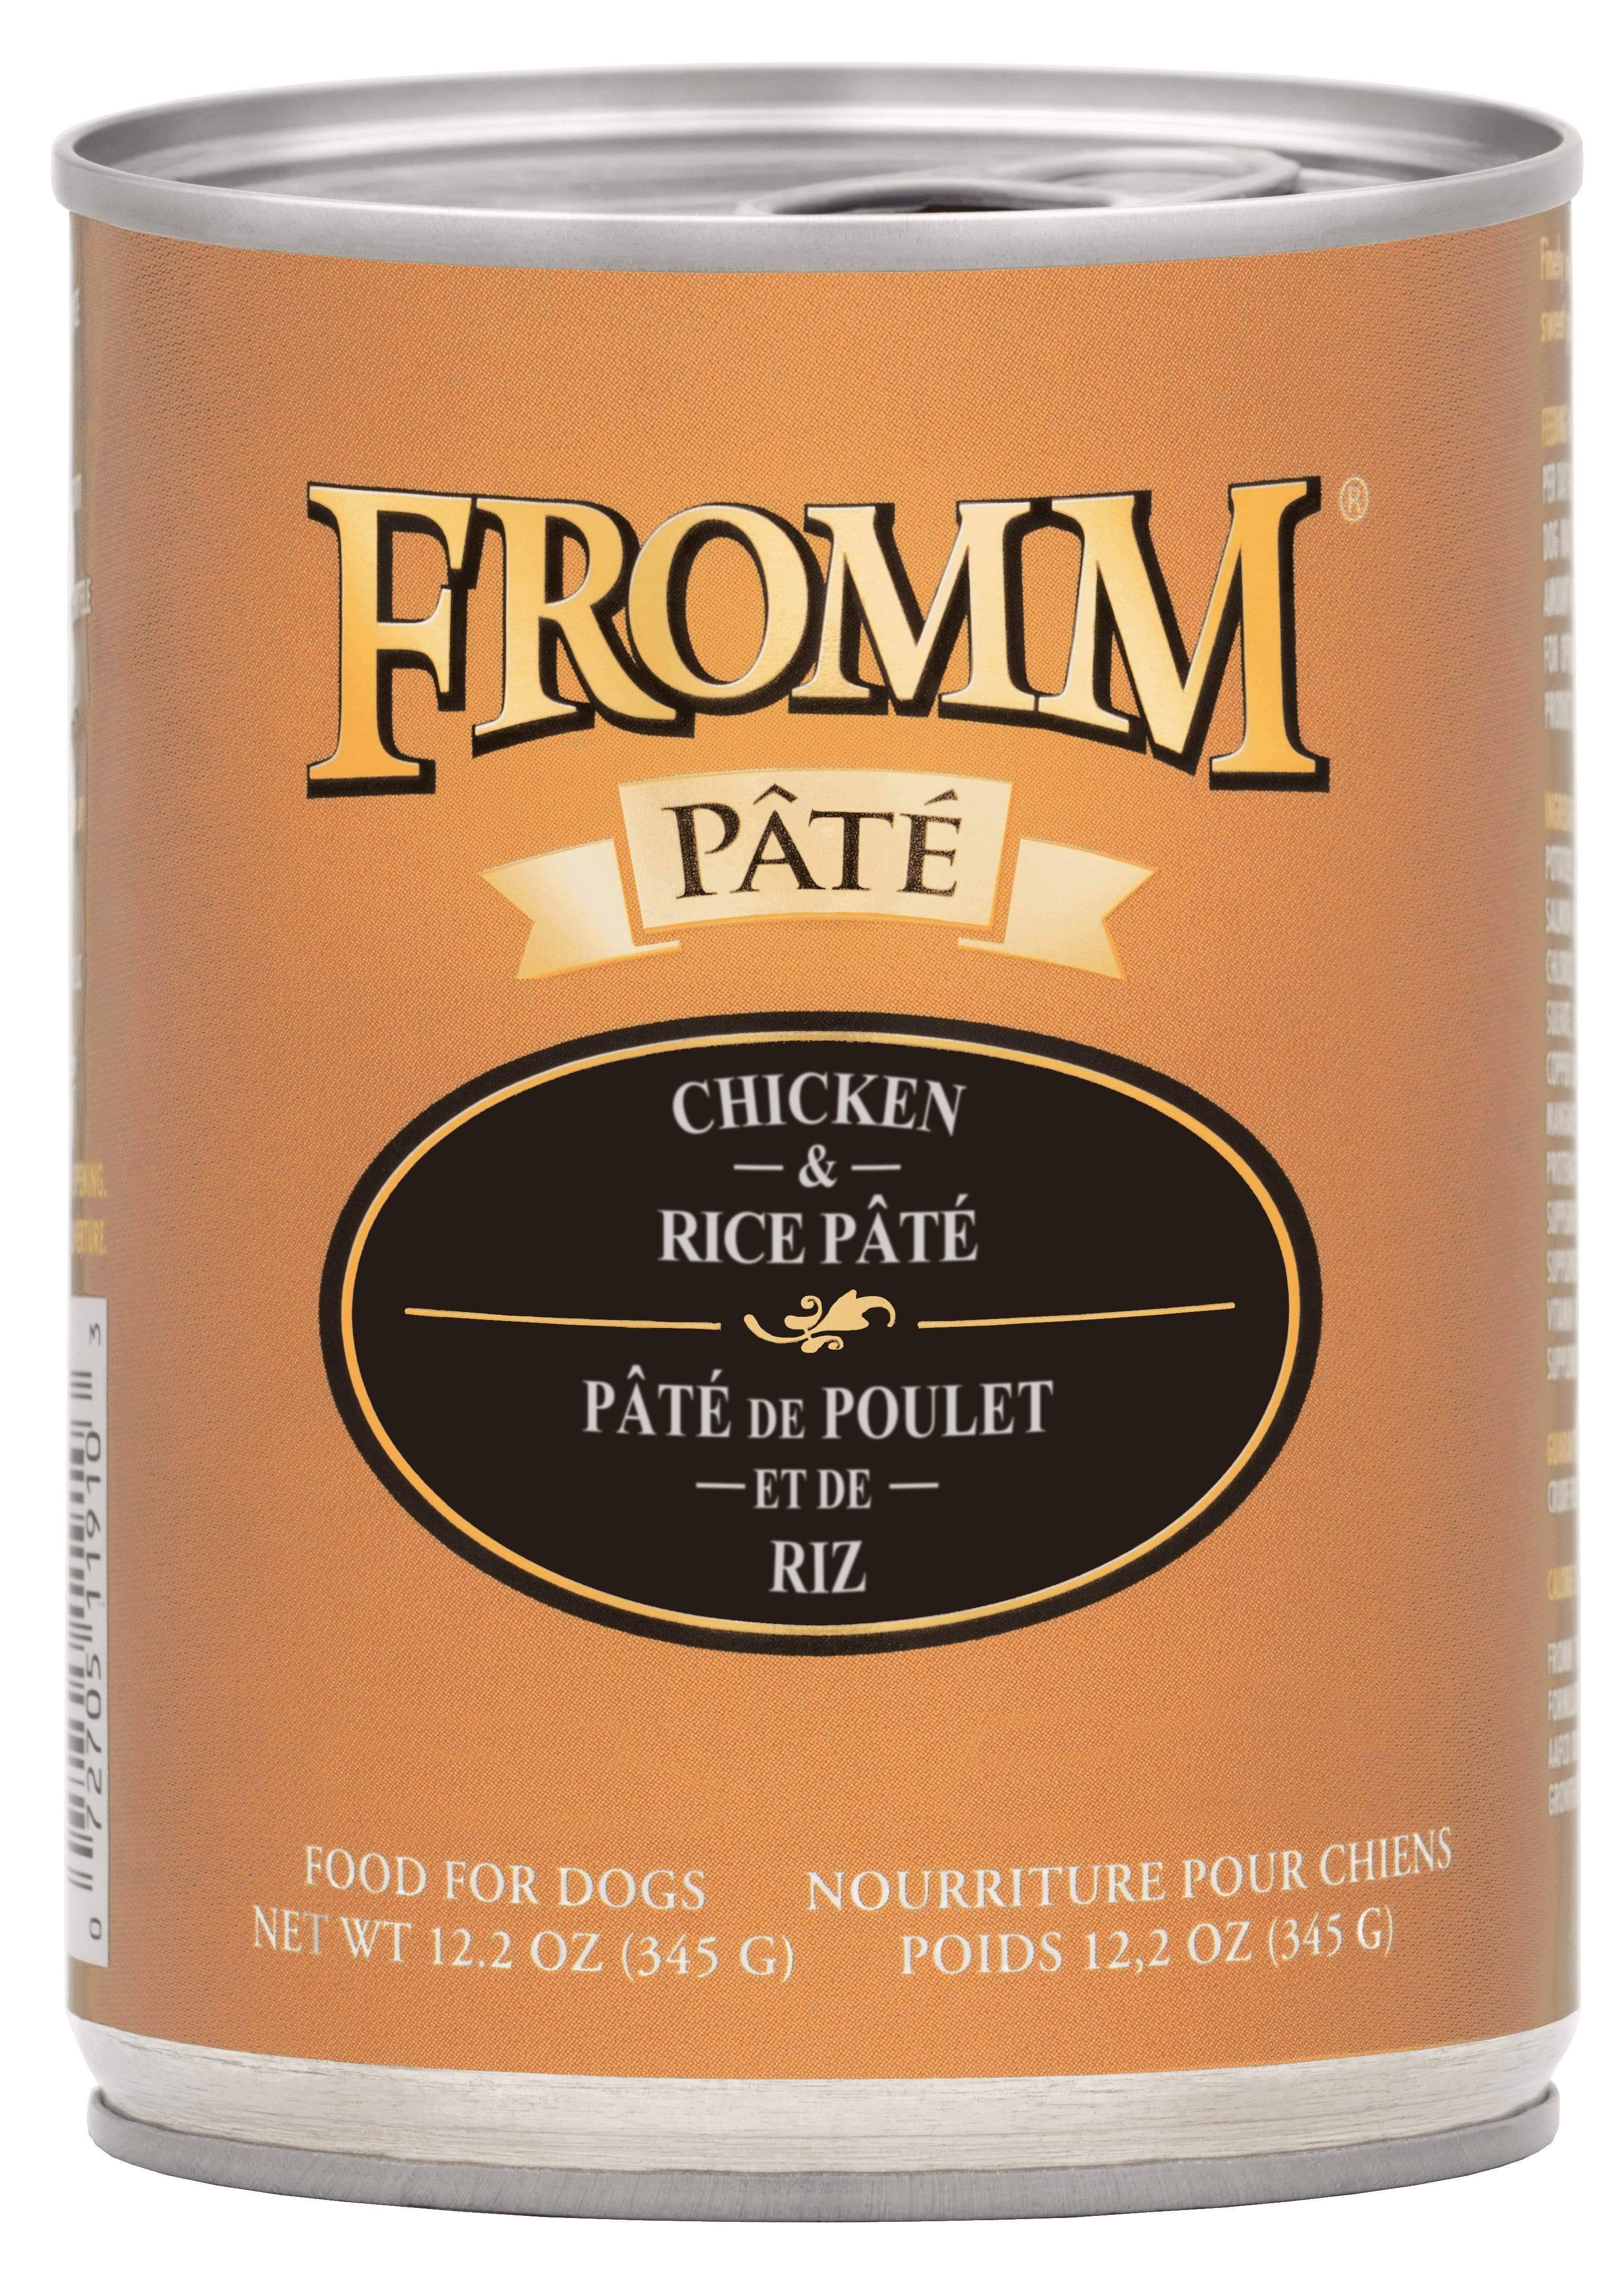 Fromm Chicken & Rice Pate Dog Food - 12.2 oz - Case-12